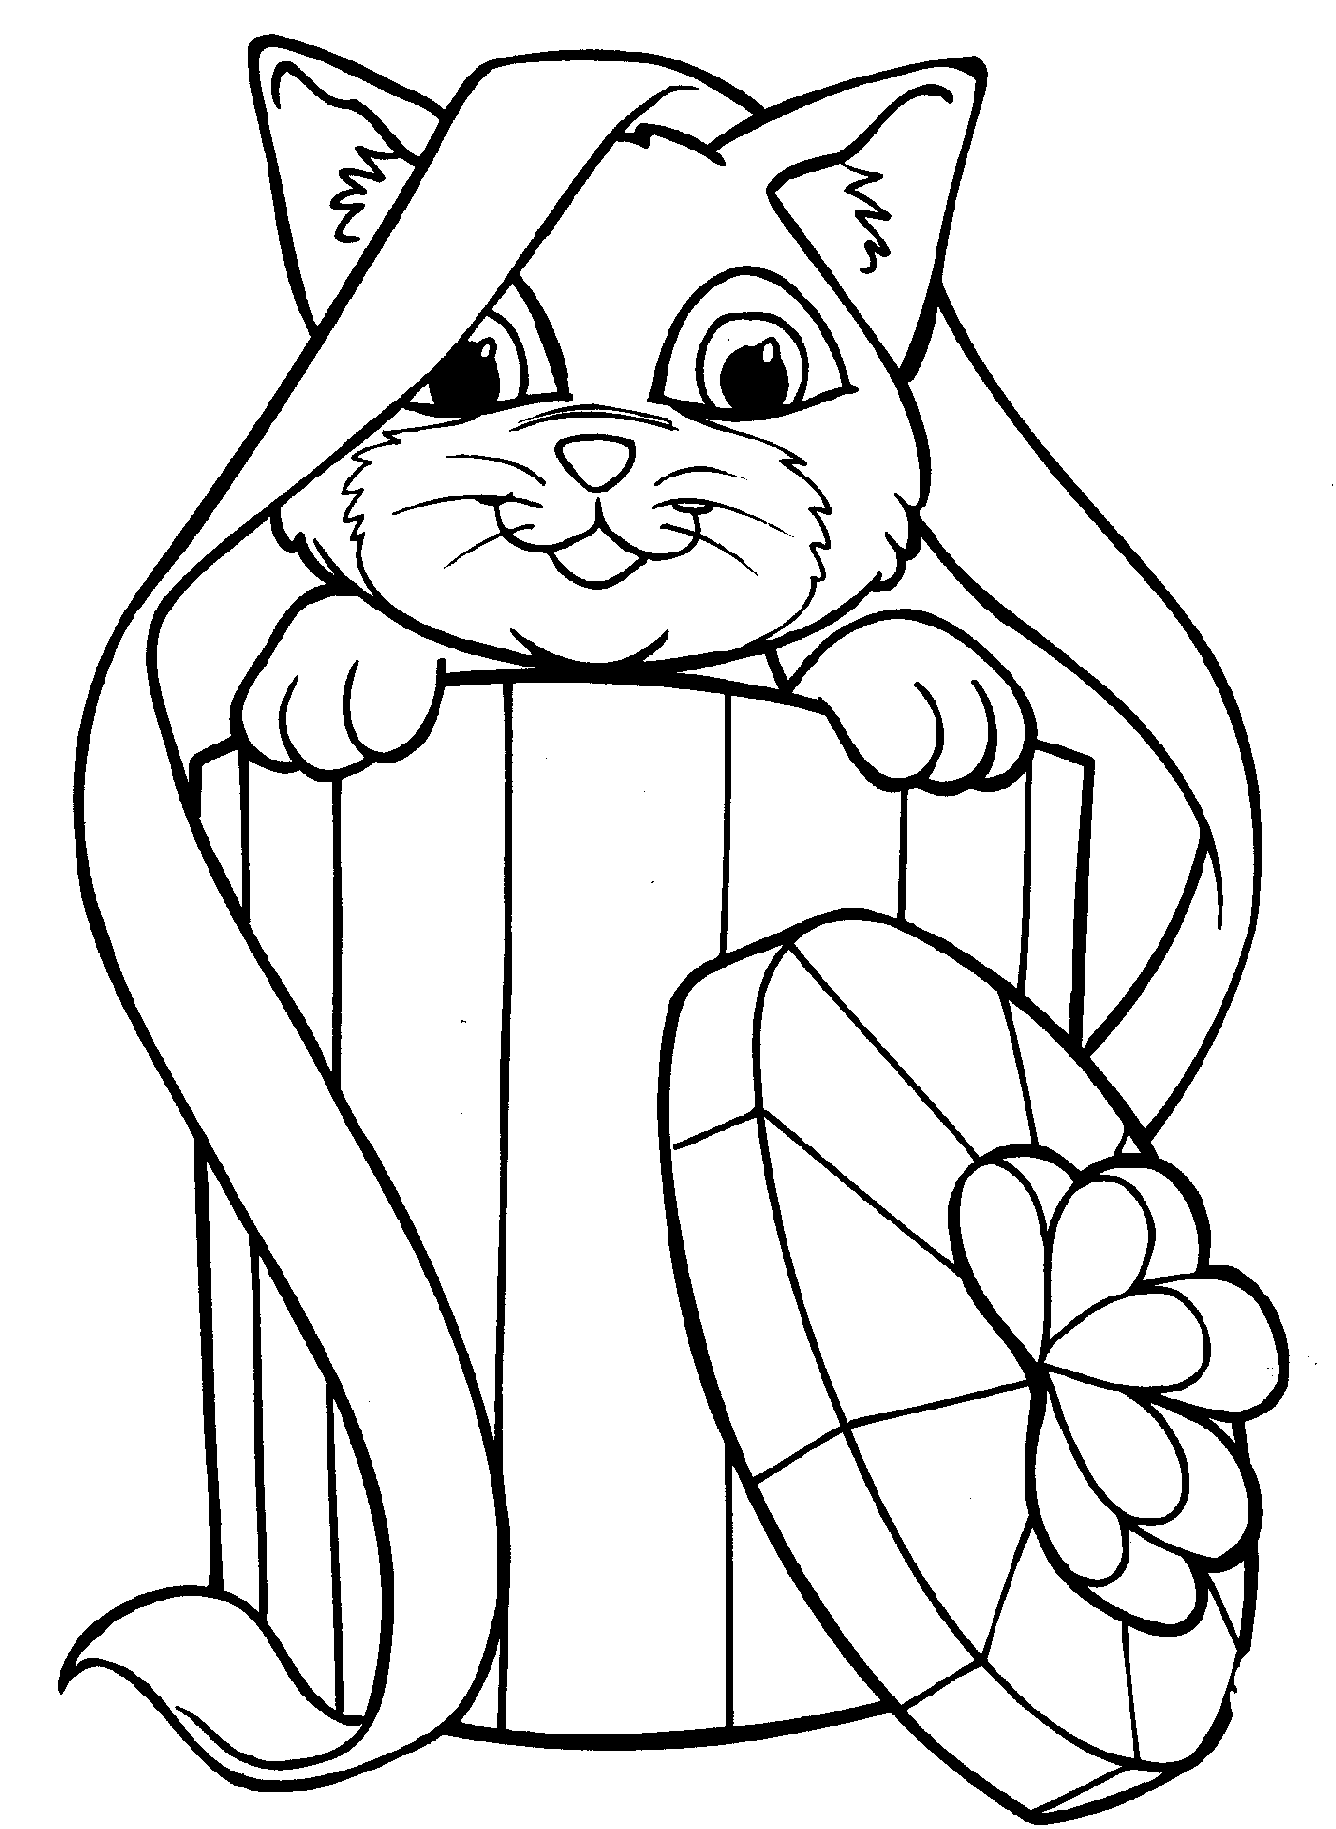 Puppies And Kittens Coloring Pages Kittens Coloring Puppy And ...